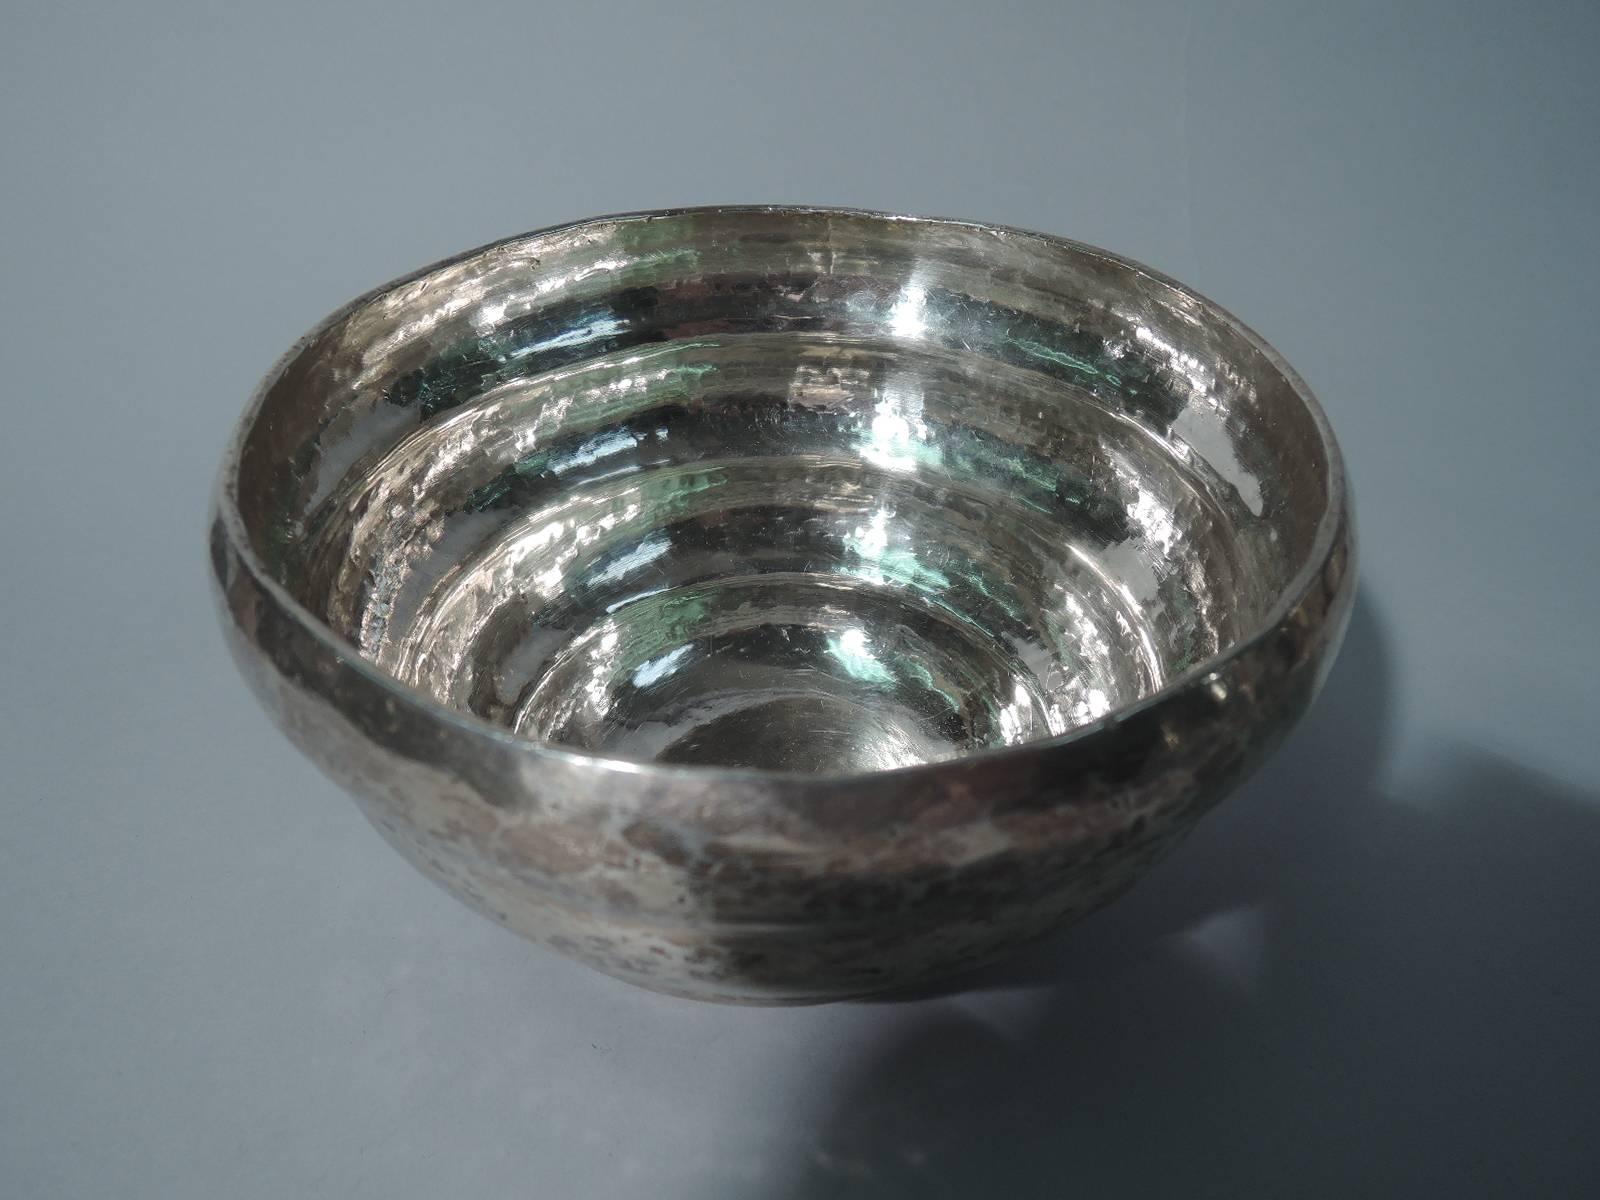 Antique South American silver bowl. Beehive form. Handmade with visible hand hammering. Heavy and substantial. Attractive period wear and rich patina. Beautiful craftsmanship - looks great with traditional or Modern decor.

Dimensions: H 3 7/8 x D